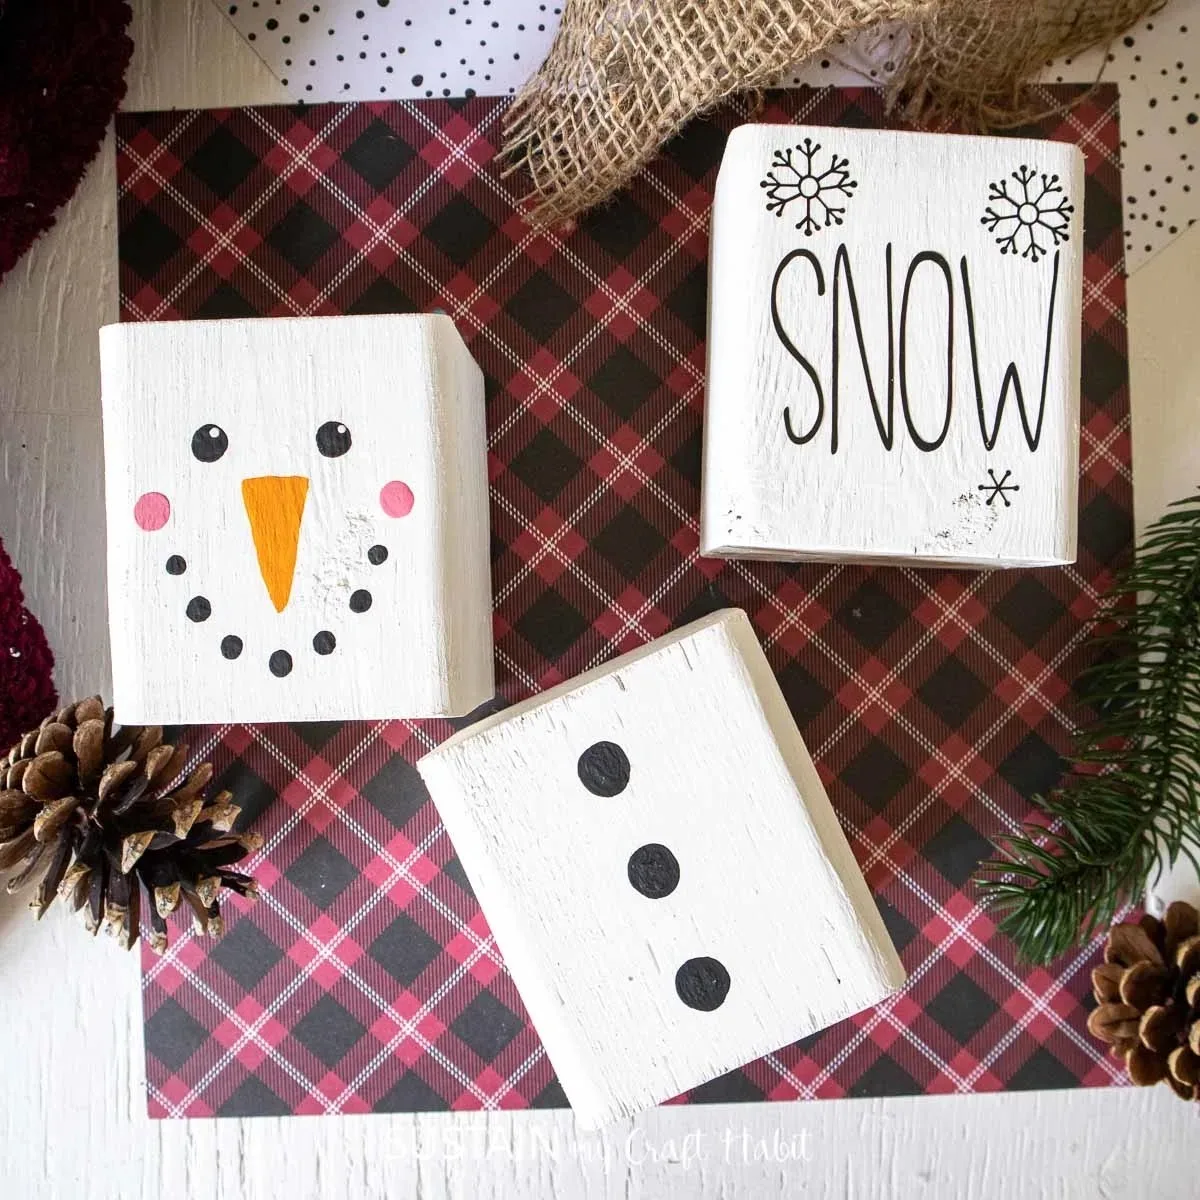 Five Crafts to Make with Wooden Blocks